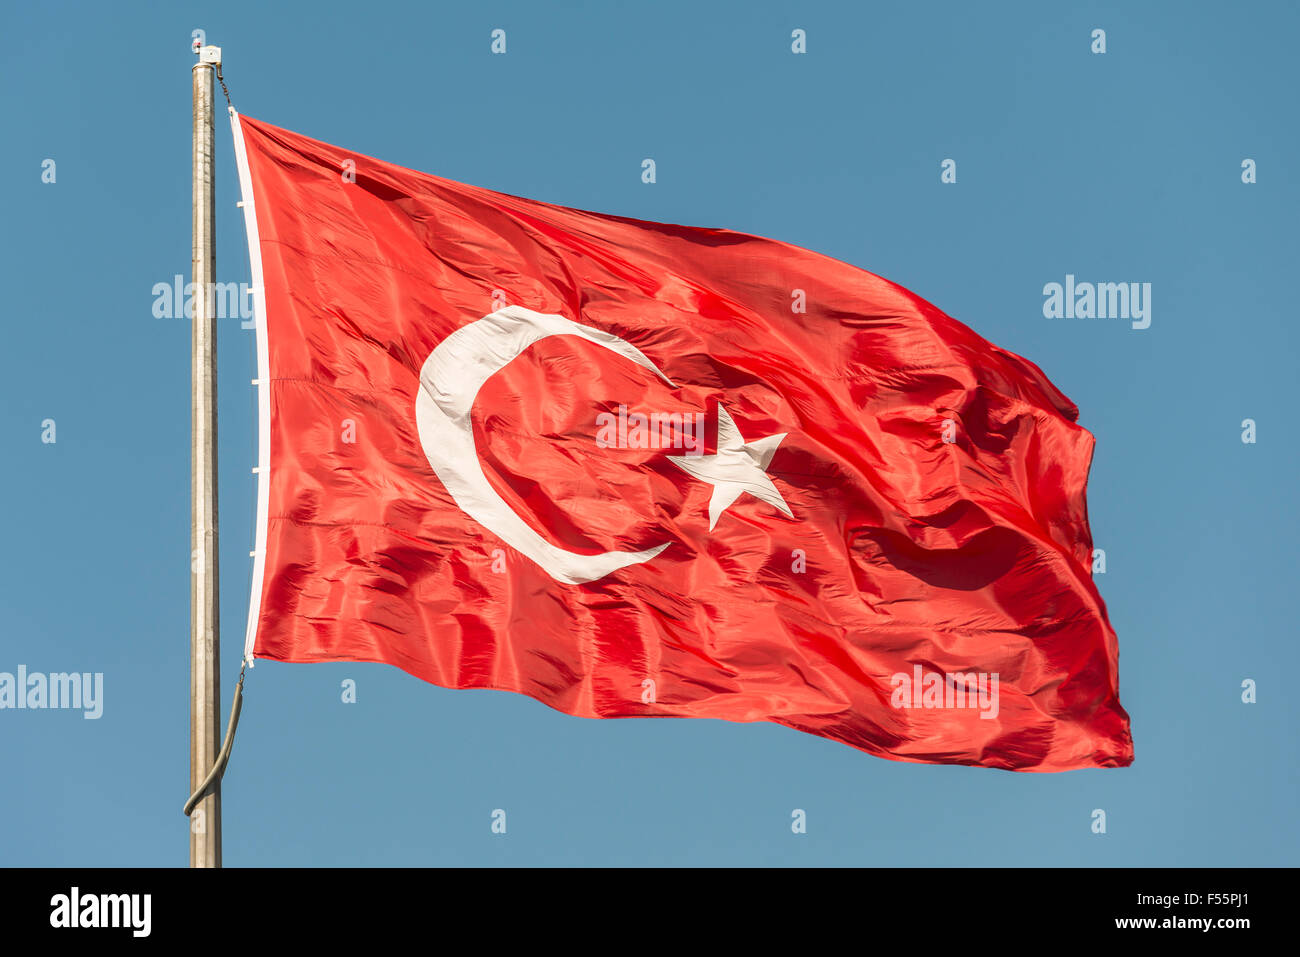 Turkish flag waving in the wind Stock Photo